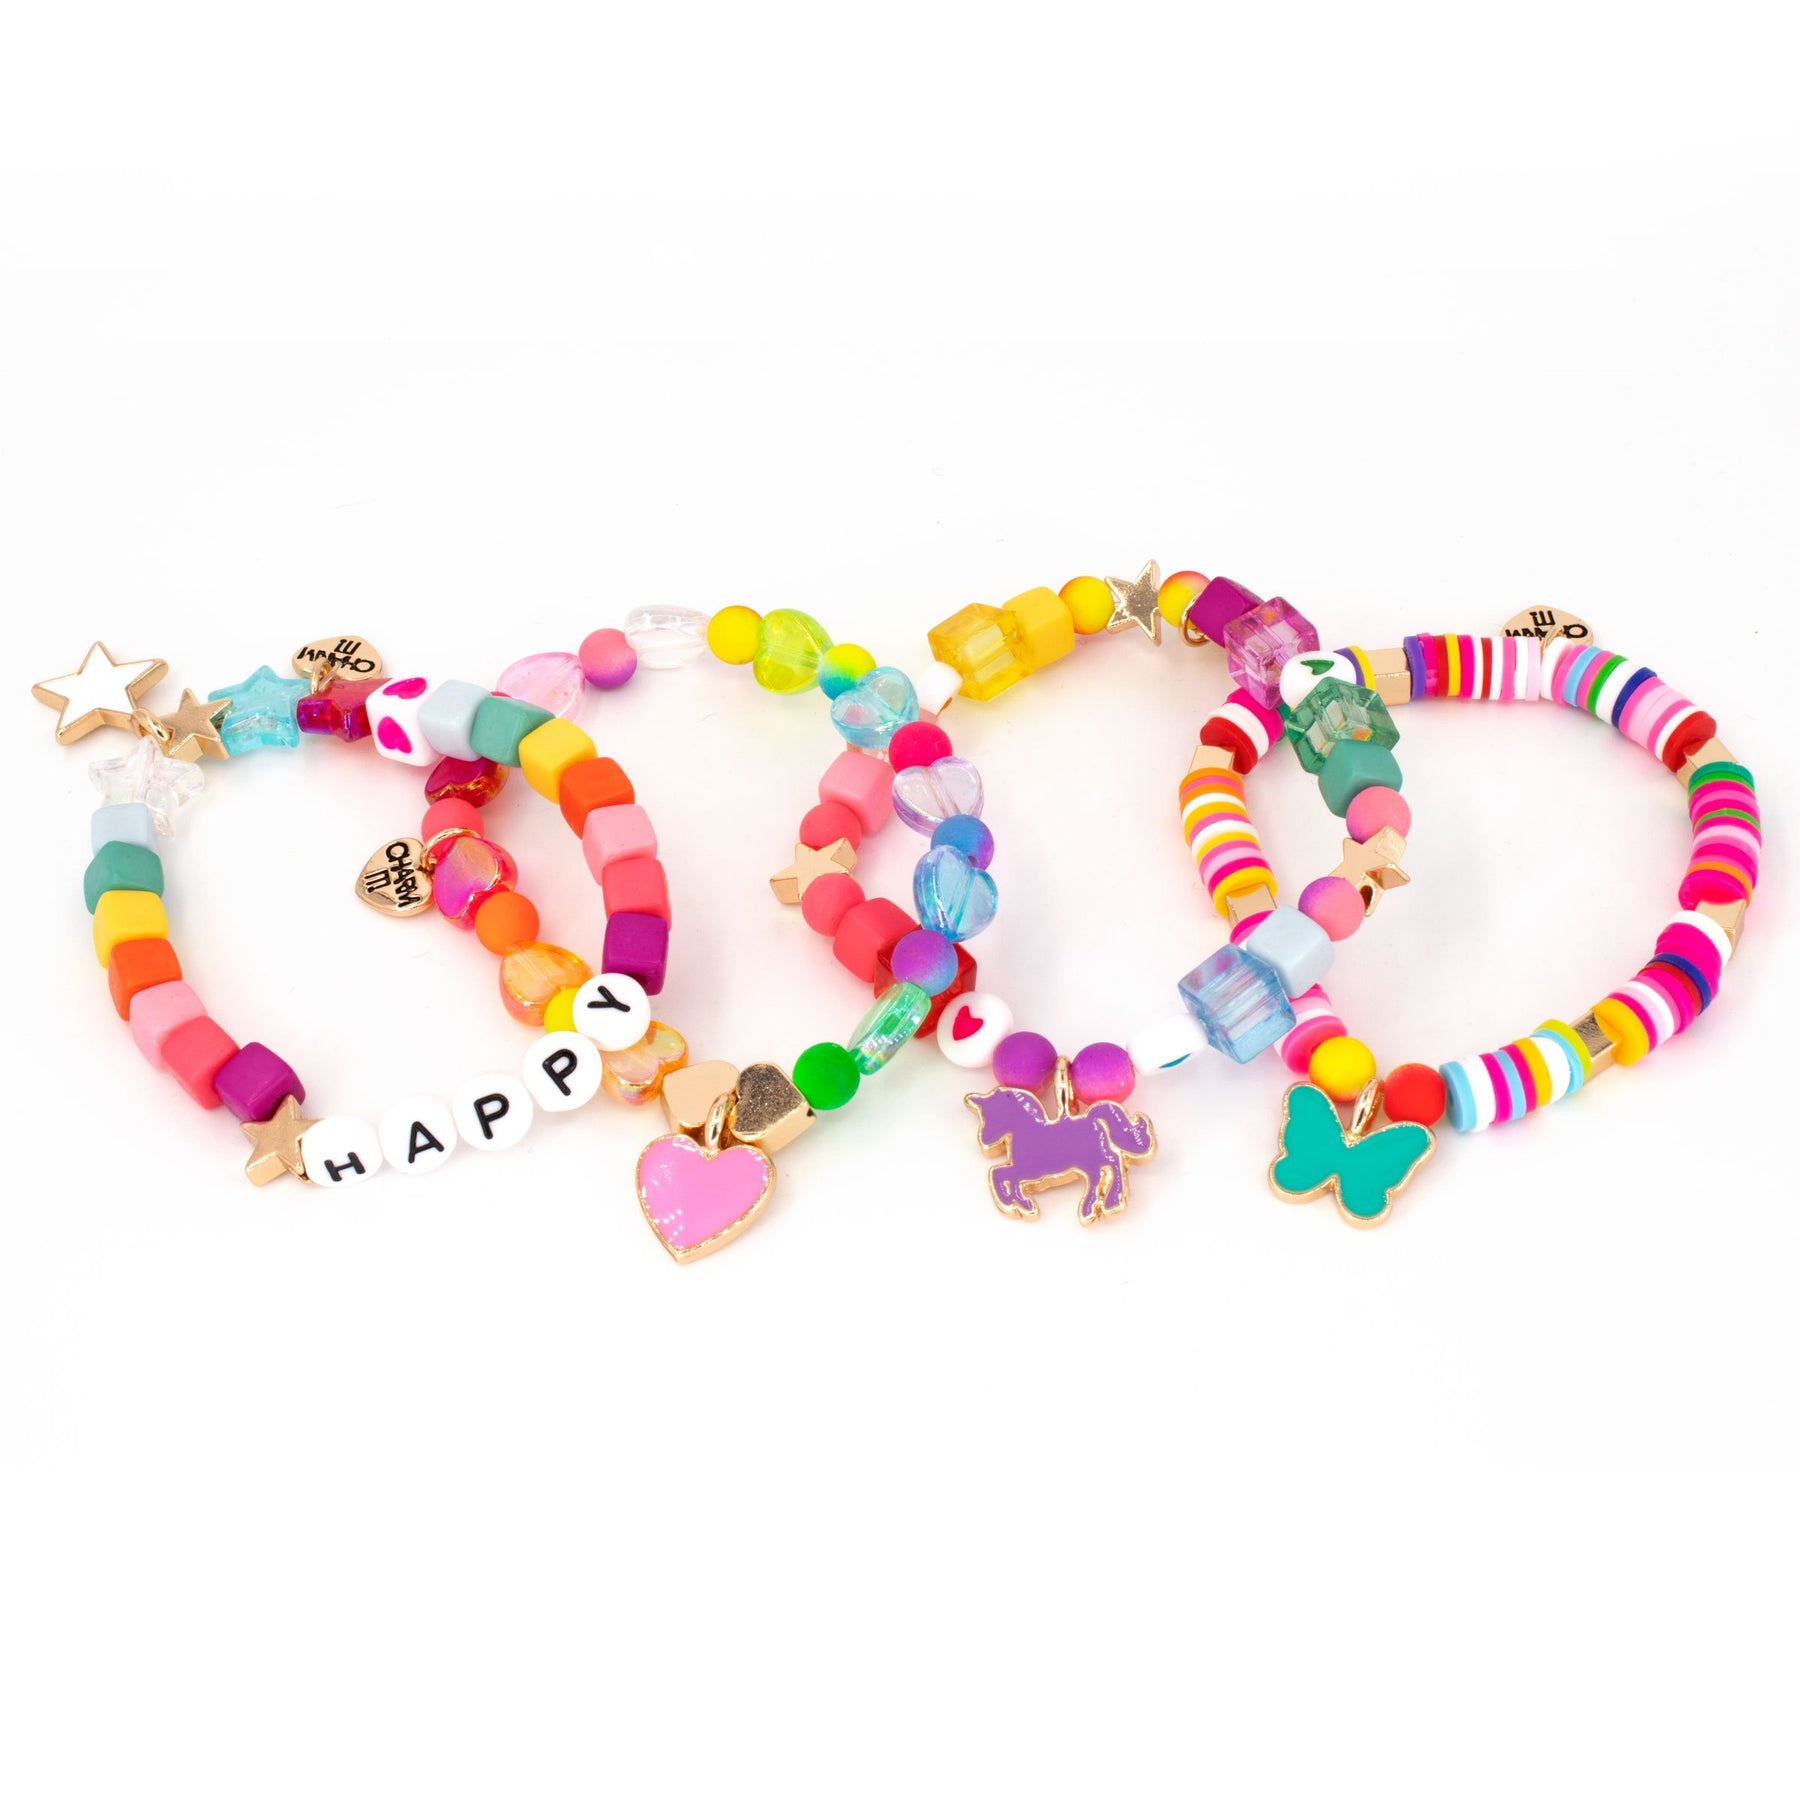 Kandies 400 Assorted Colorful Bracelet Bead Kit for Beading, Bracelets, Necklace, Jewelry, Art & Crafts. Perfect for Kids and Adults, Adult Unisex, Size